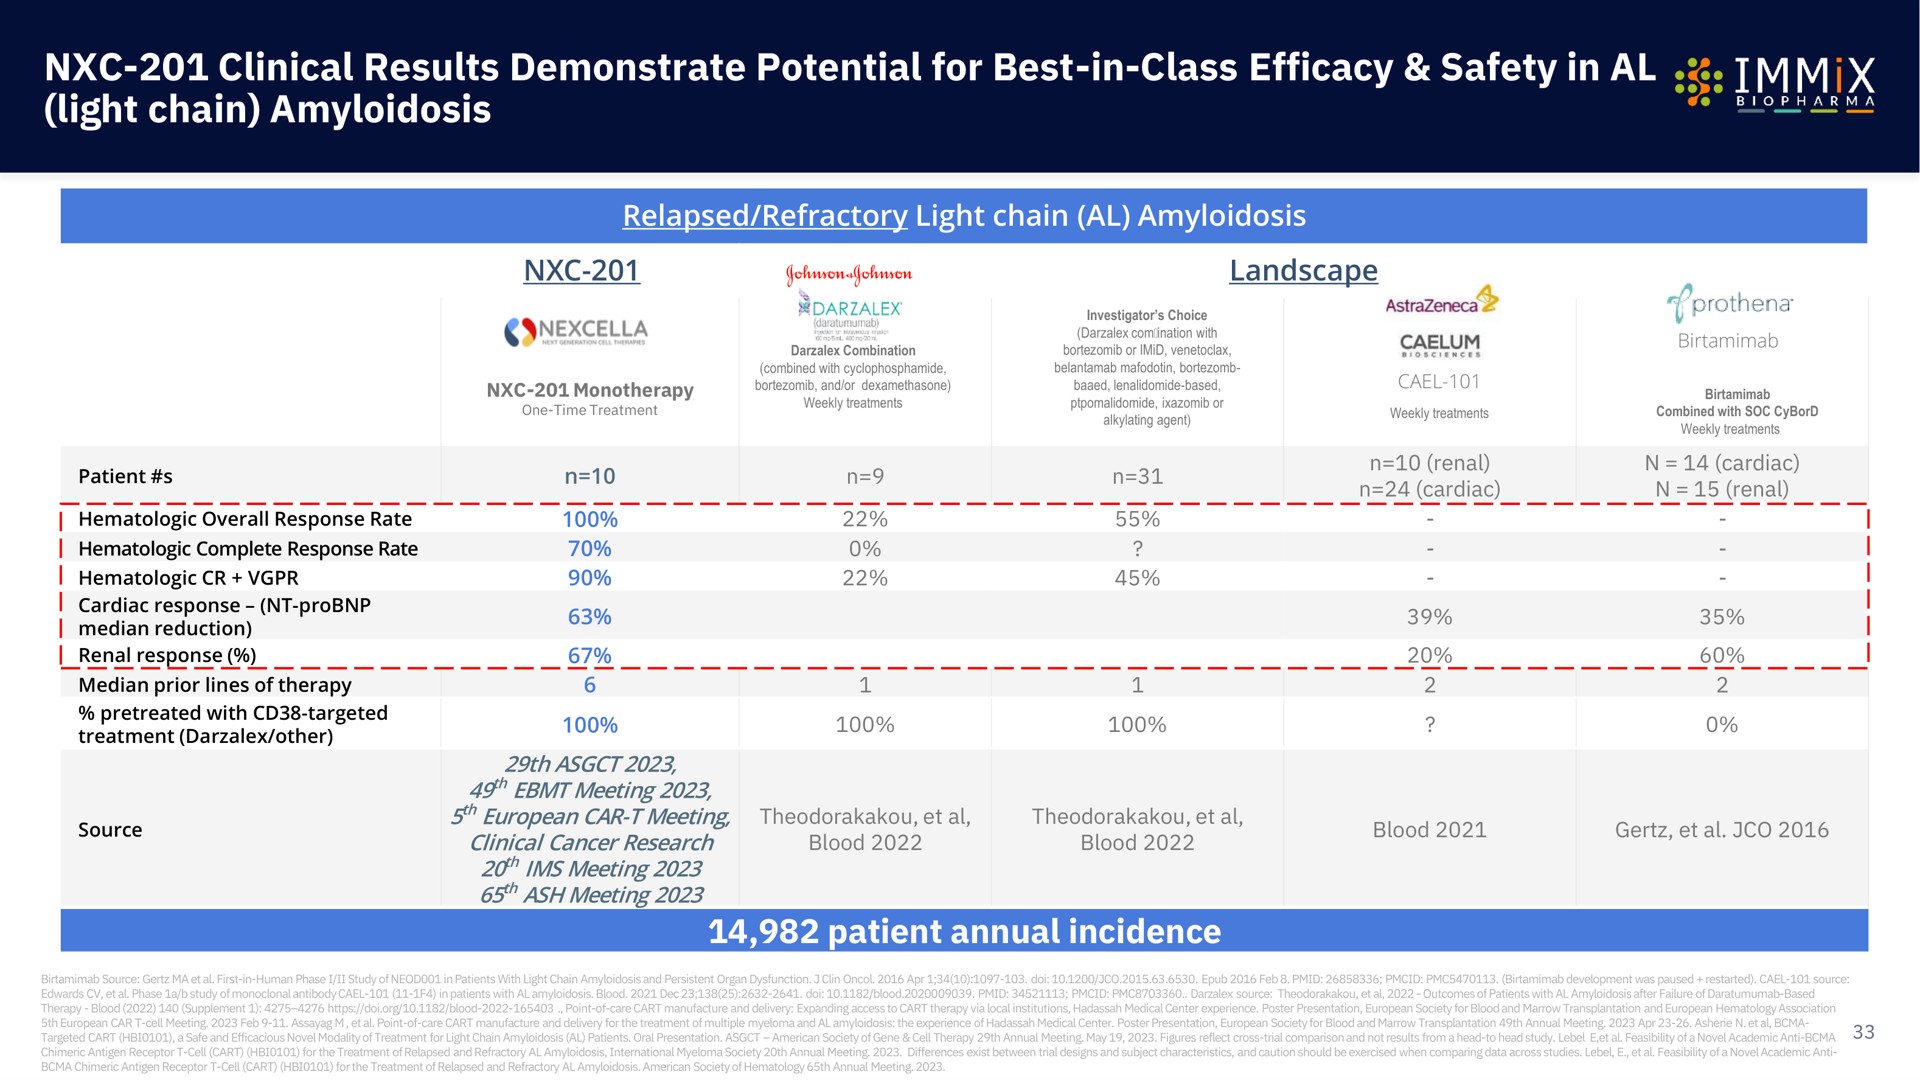 clinical results demonstrate potential for best in class efficacy safety in light chain amyloidosis | Immix Biopharma